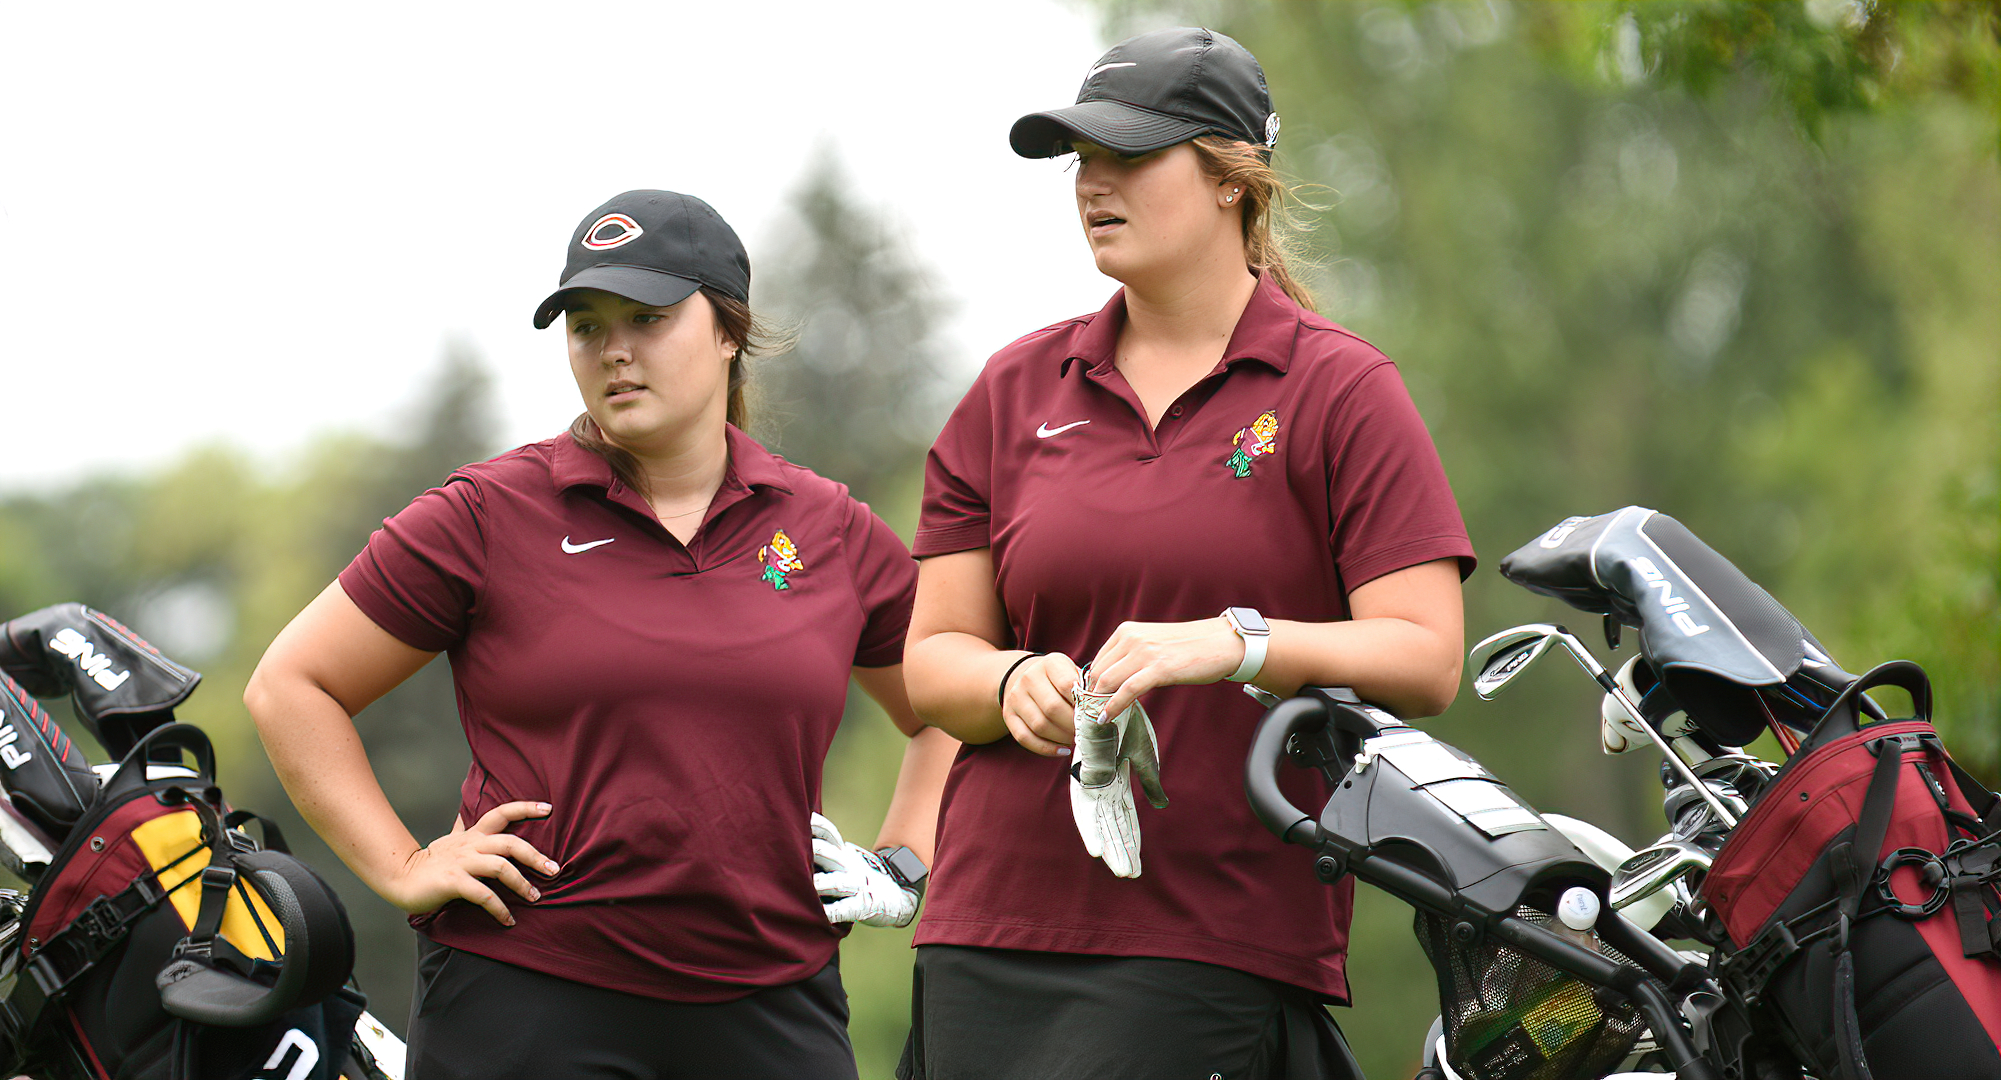 Abbey Frauenholtz (L) and Lillie Kirchner were two of the Top 3 golfers for the Cobbers at the Carleton/St. Olaf Spring Invite.